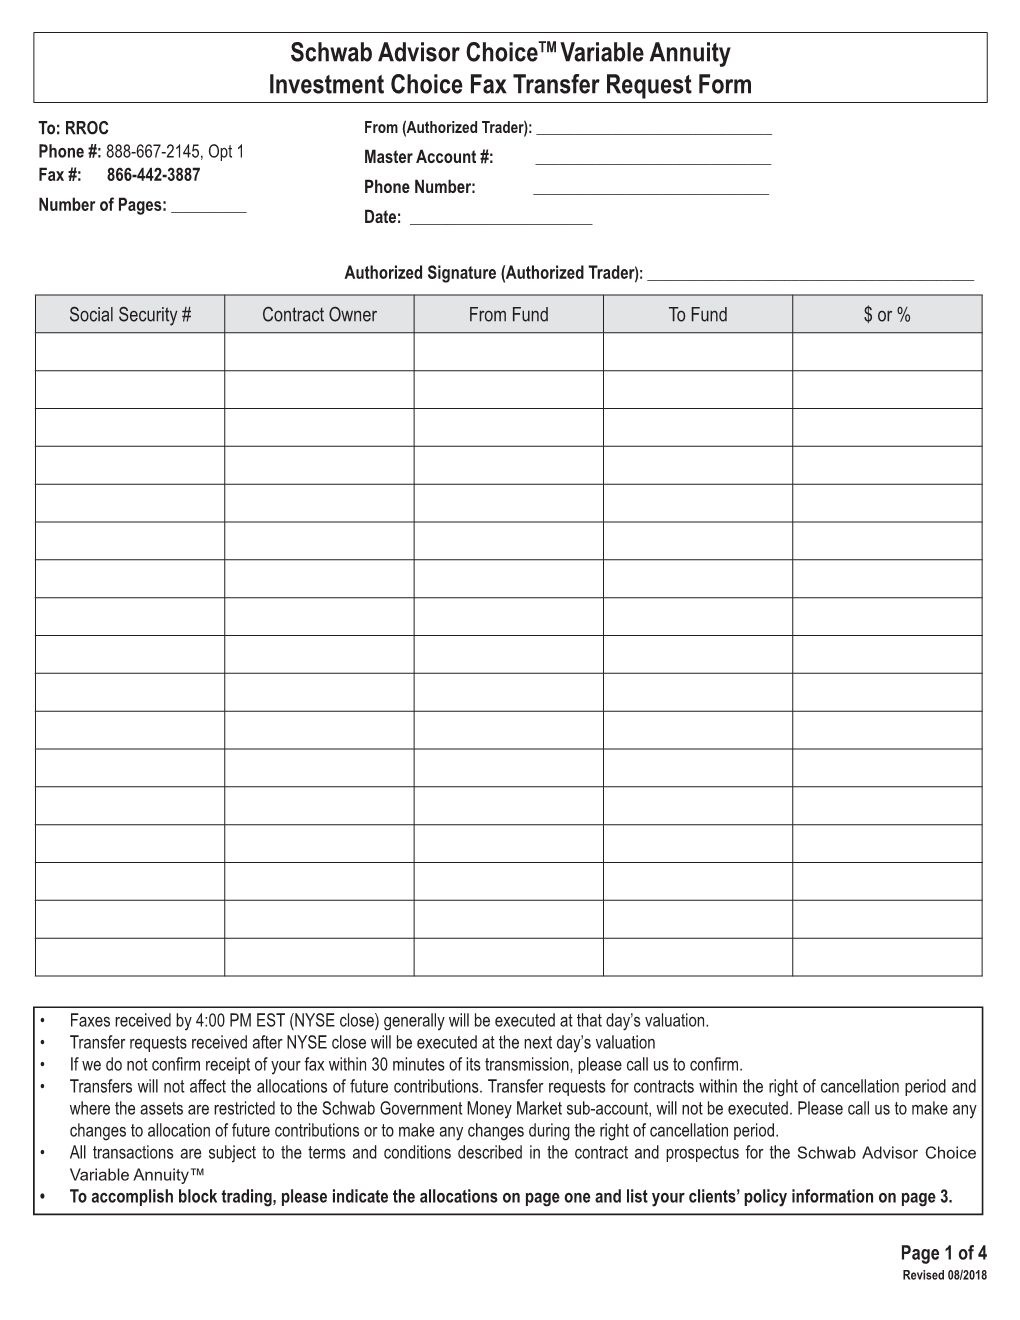 Schwab Advisor Choicetm Variable Annuity Investment Choice Fax Transfer Request Form